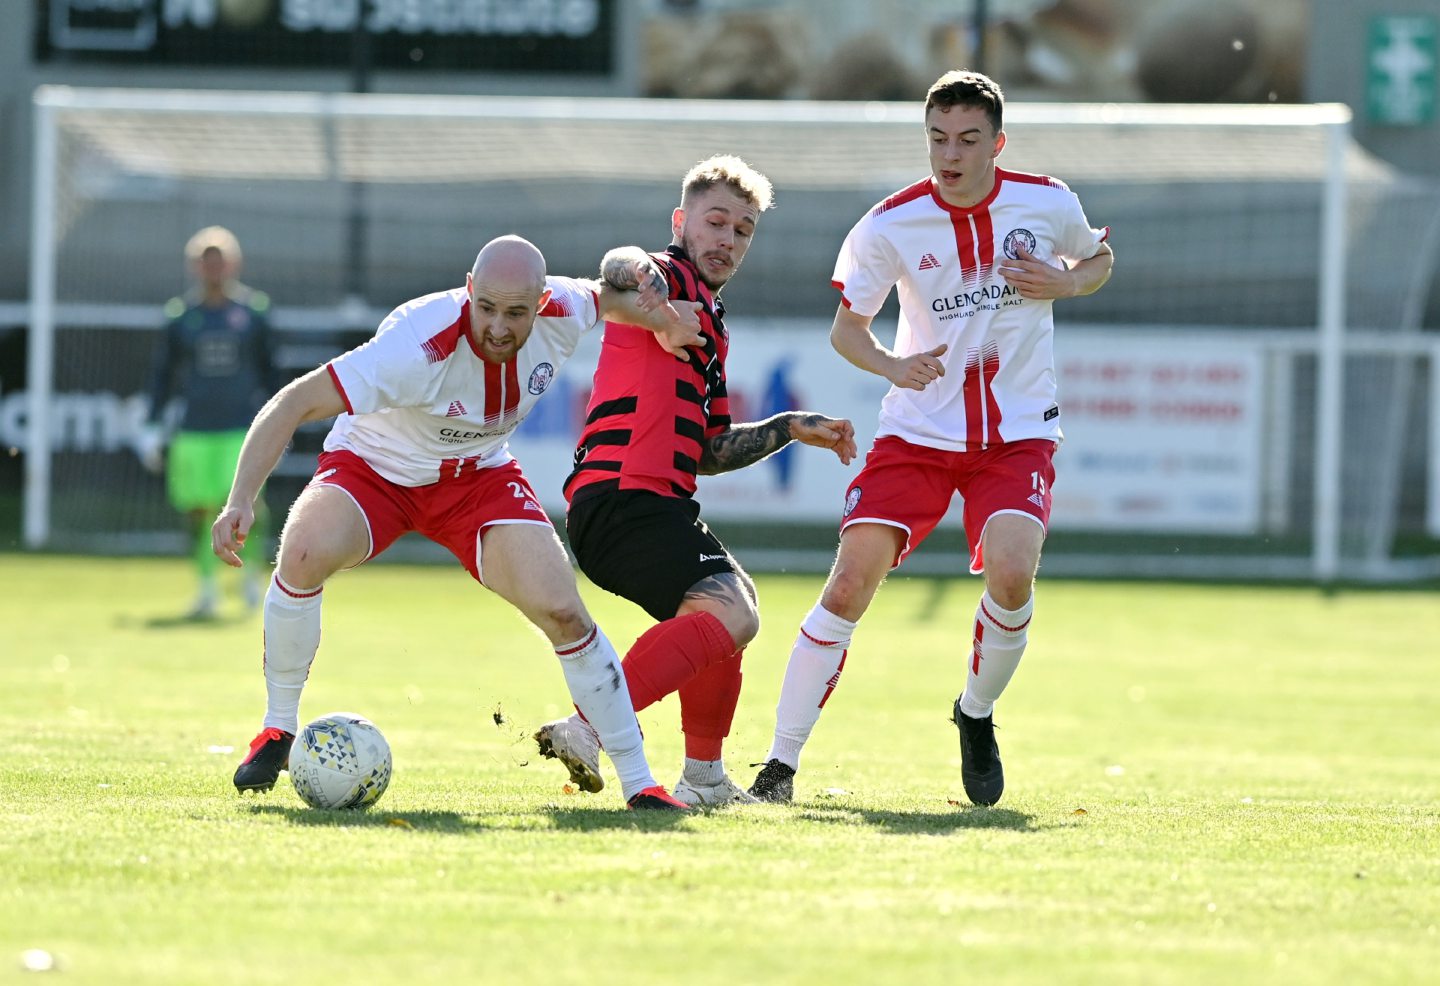 Spark (left) in action for Brechin earlier this season. Image: Kath Flannery